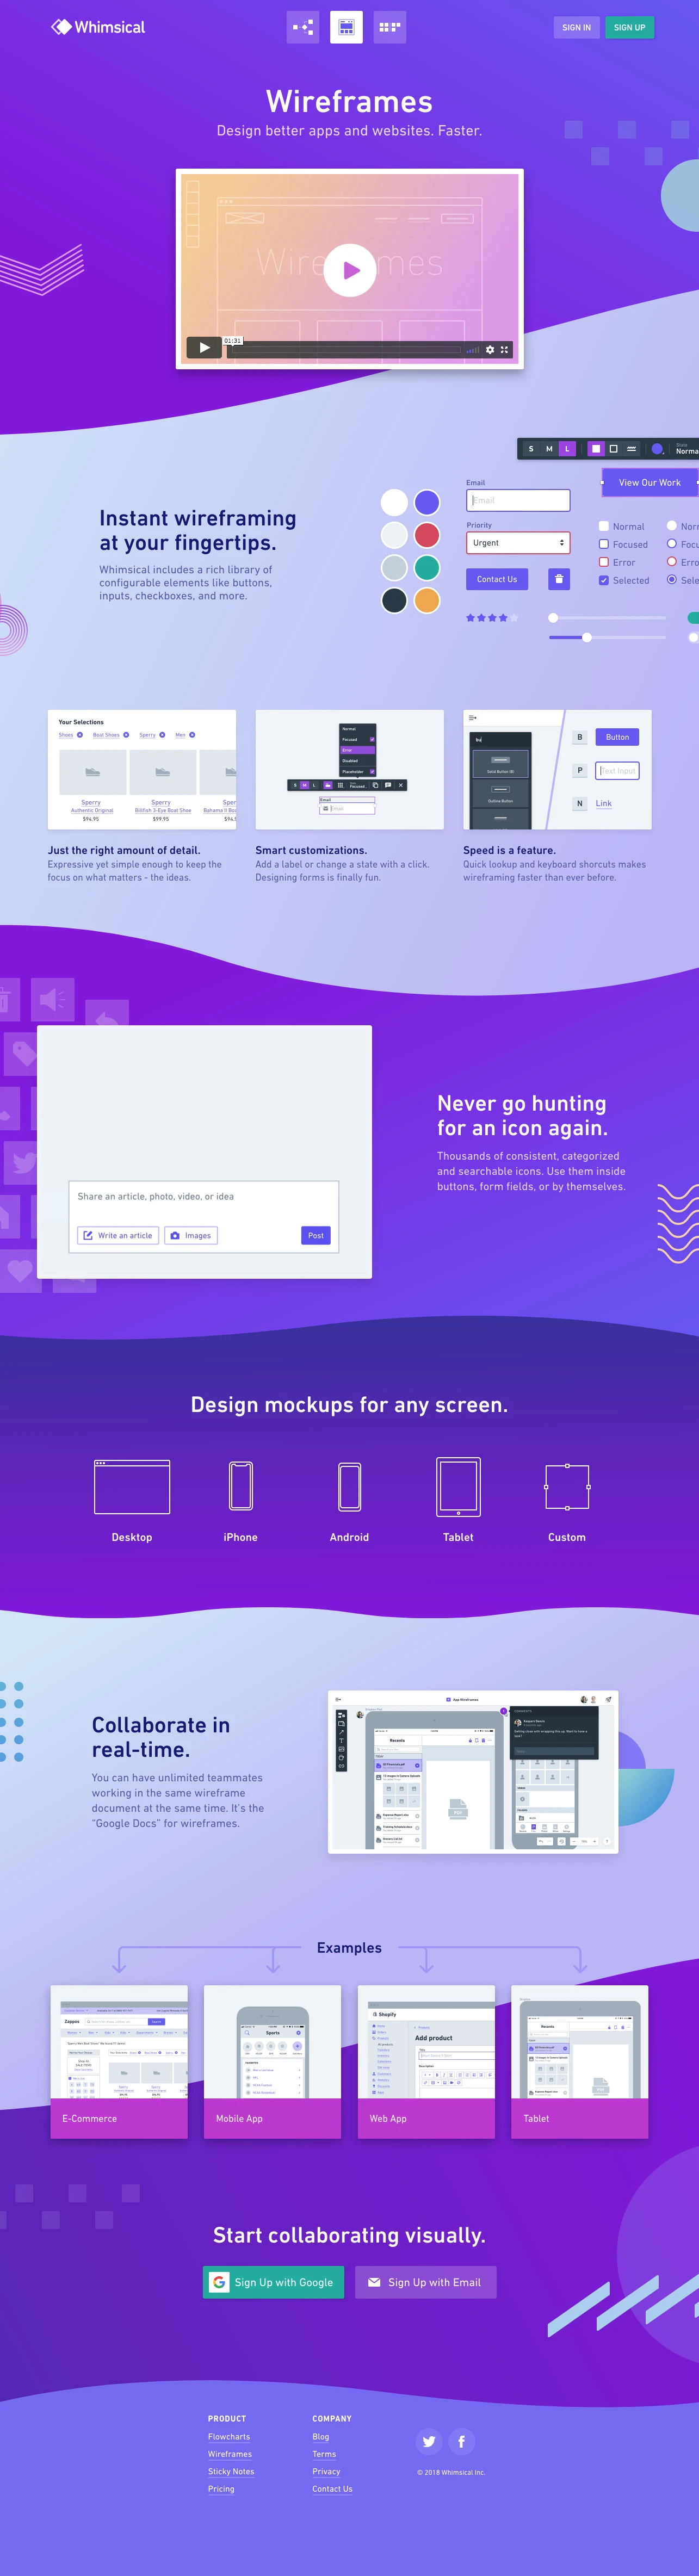 Whimsical Wireframes Landing Page Example: Collaborate on your ideas visually. Lightning fast.